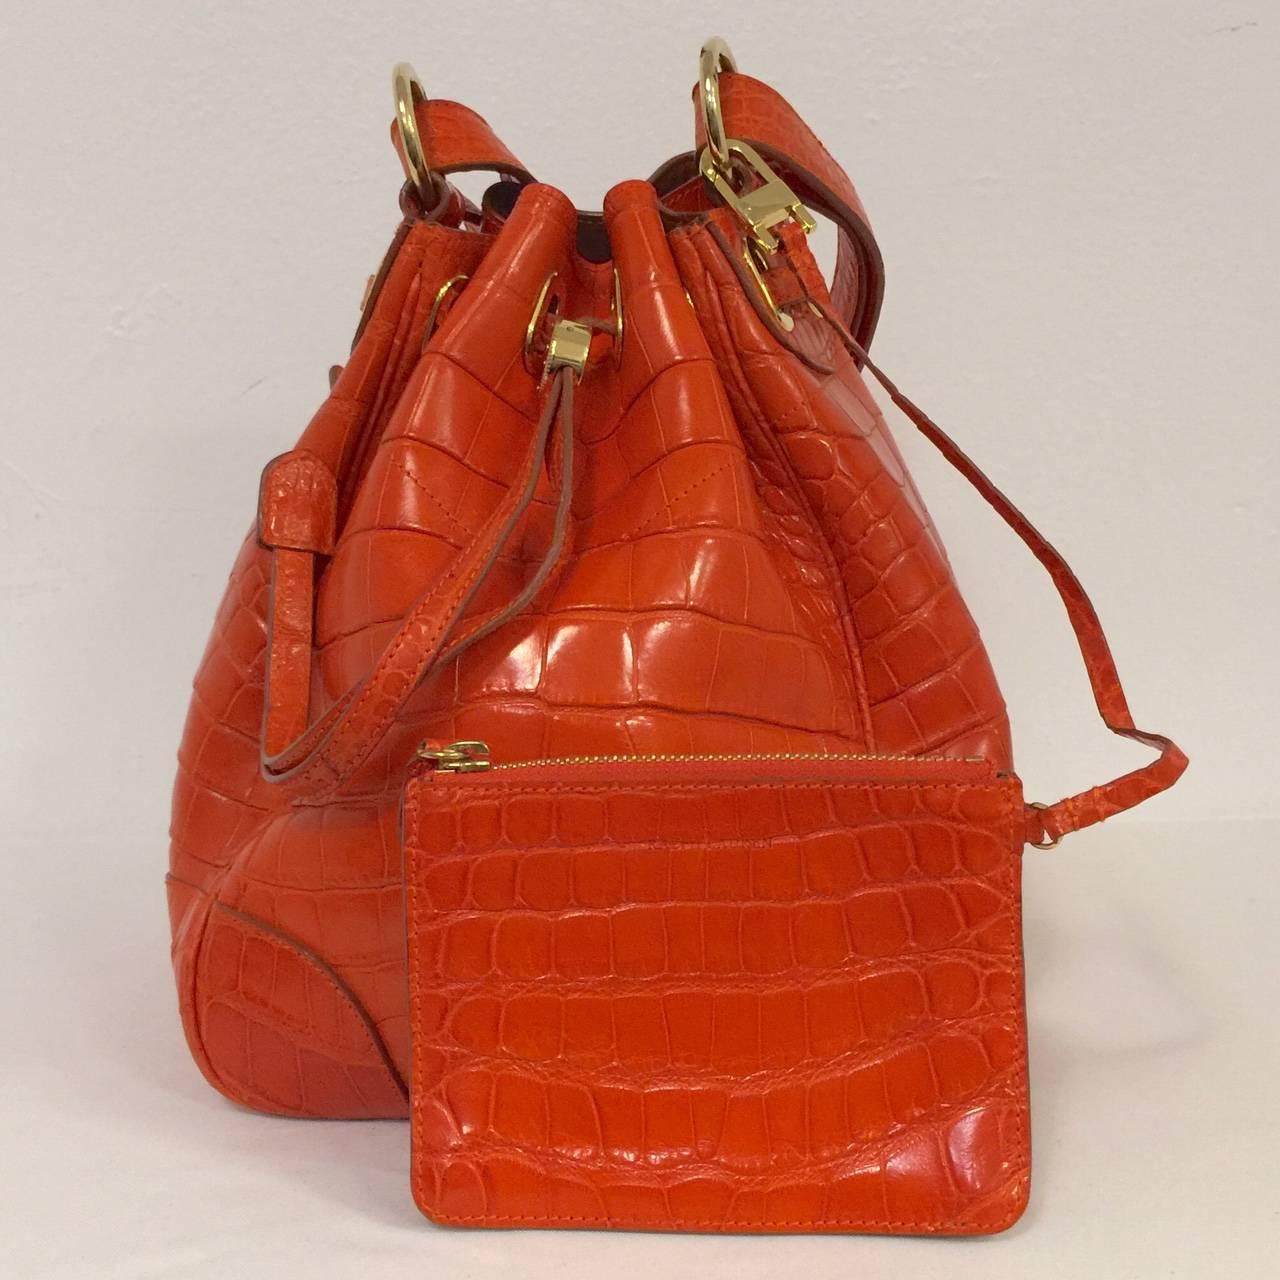 Orange Alligator Bucket Bag illustrates why Ralph Lauren has become America's preeminent designer of luxury goods!  Crafted from only the finest alligator skins, this bag's wow factor is elevated by a most luscious shade of deep orange.  Features